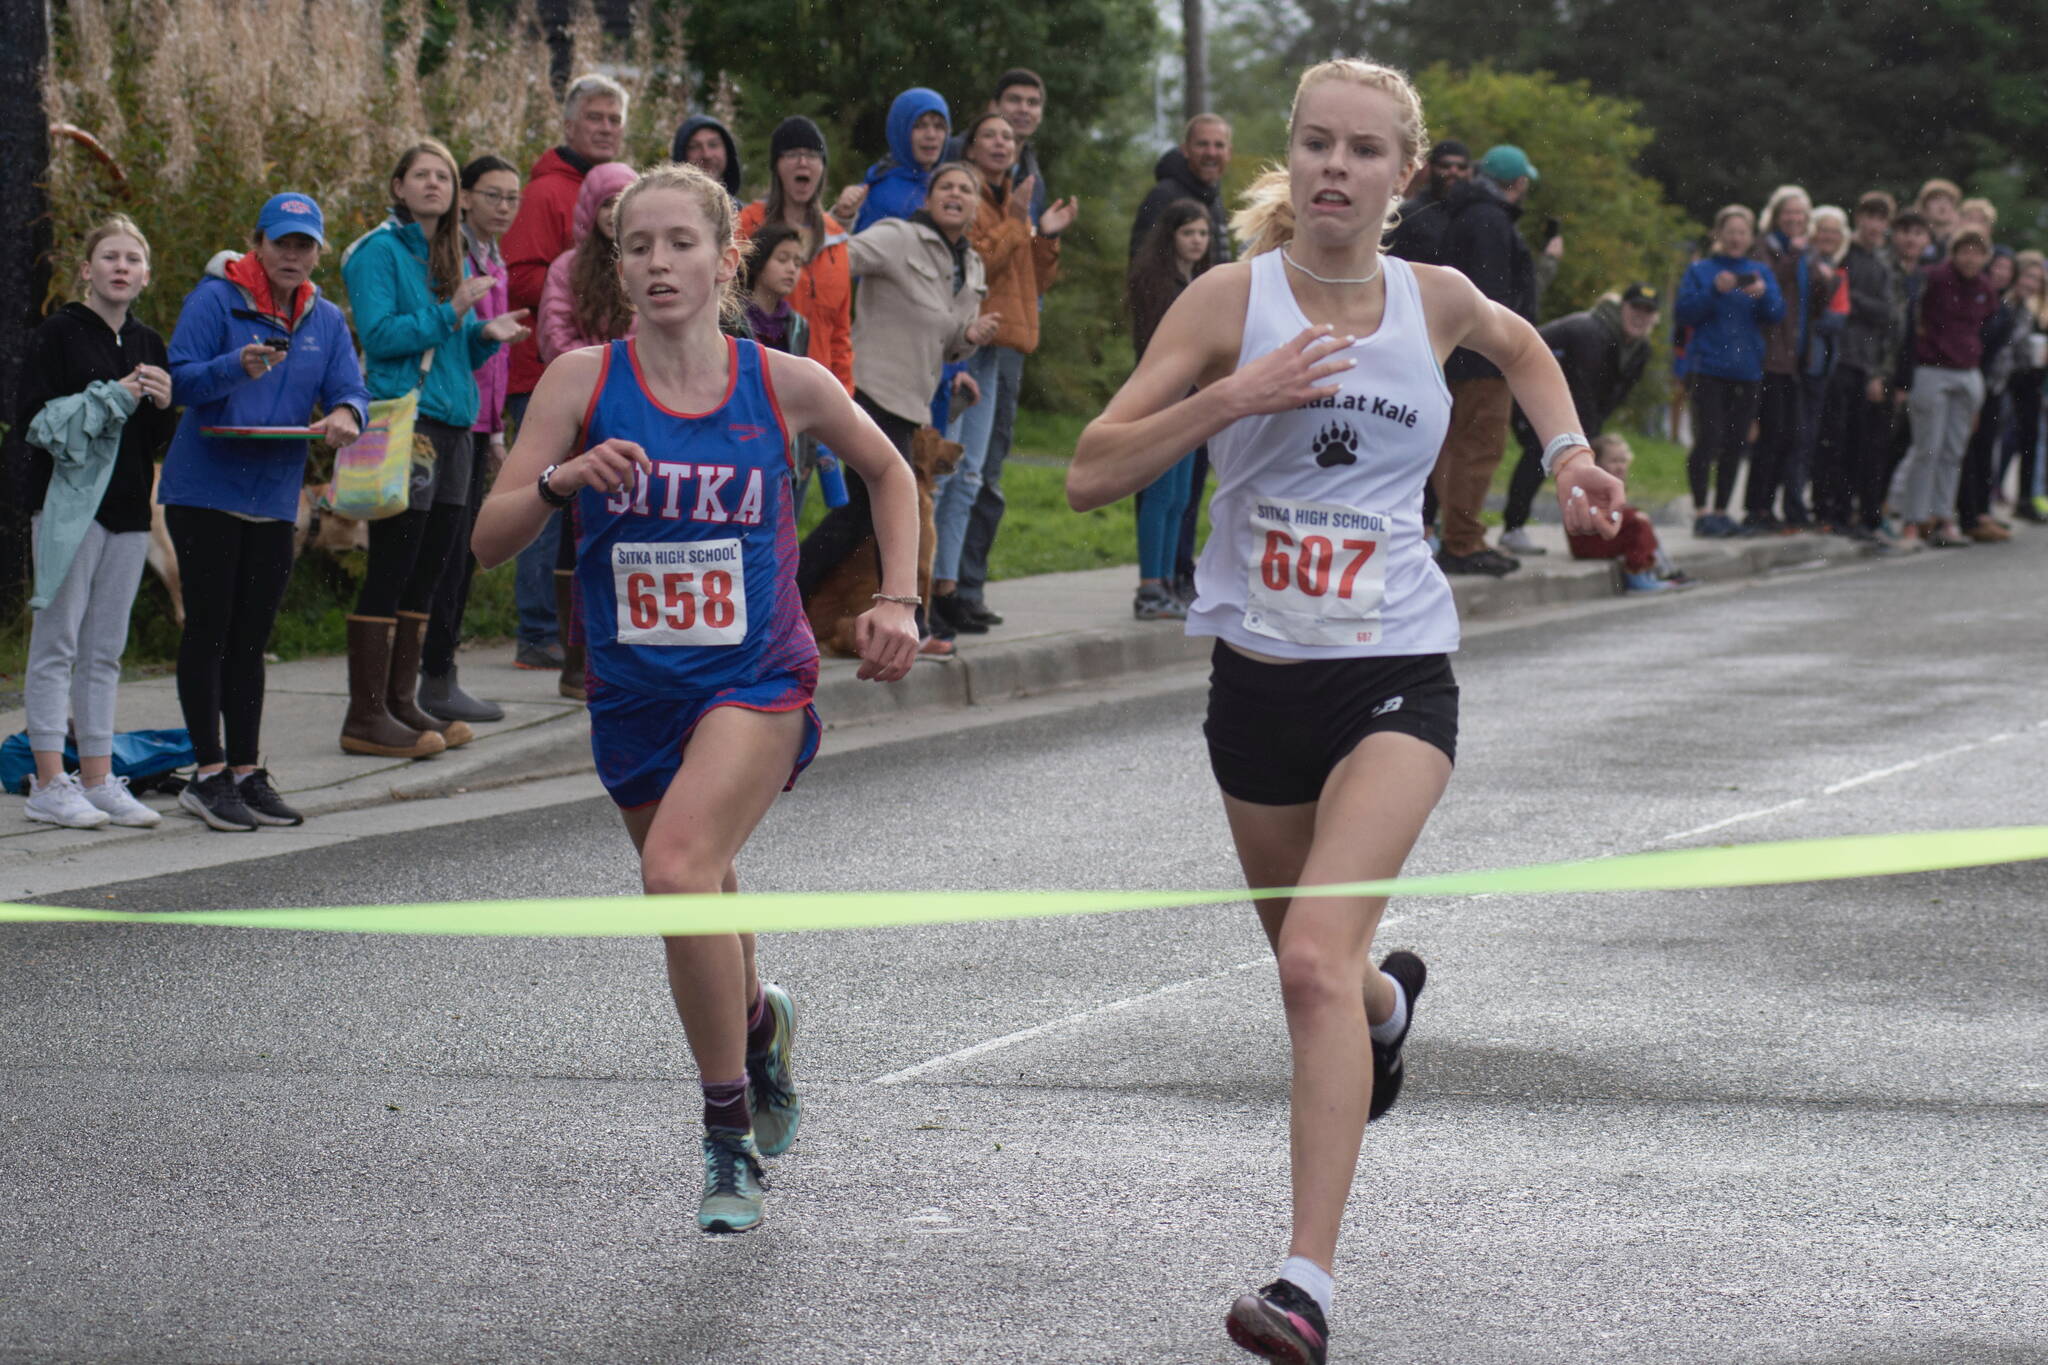 Juneau-Douglas High School: Yadaa.at Kalé junior Ida Meyer, right, wins the Sitka Invitational by a fraction of a second in front of Sitka junior Clare Mullin on Saturday. (James Poulson / Sitka Sentinel)